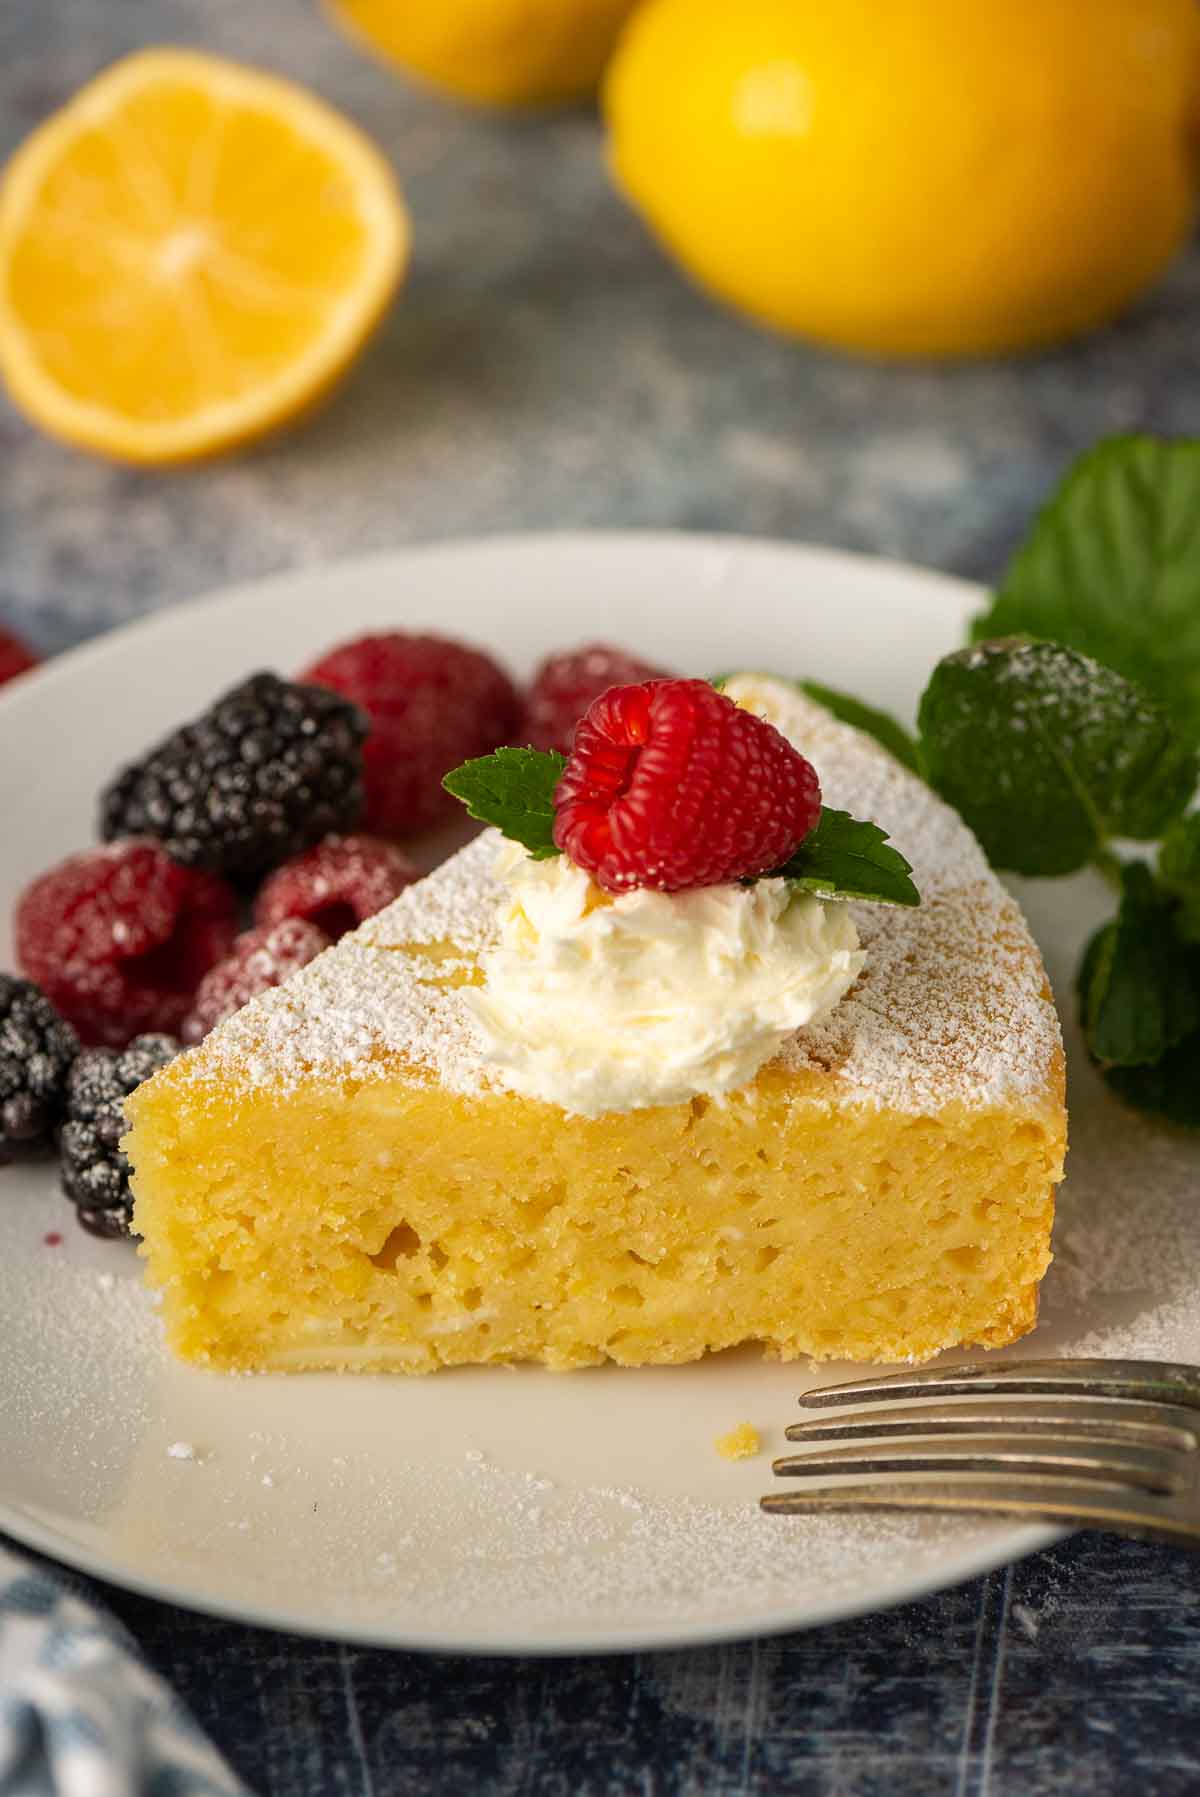 A ¾ view of a slice of Italian cake made with lemon and ricotta with a bit of mascarpone on top.